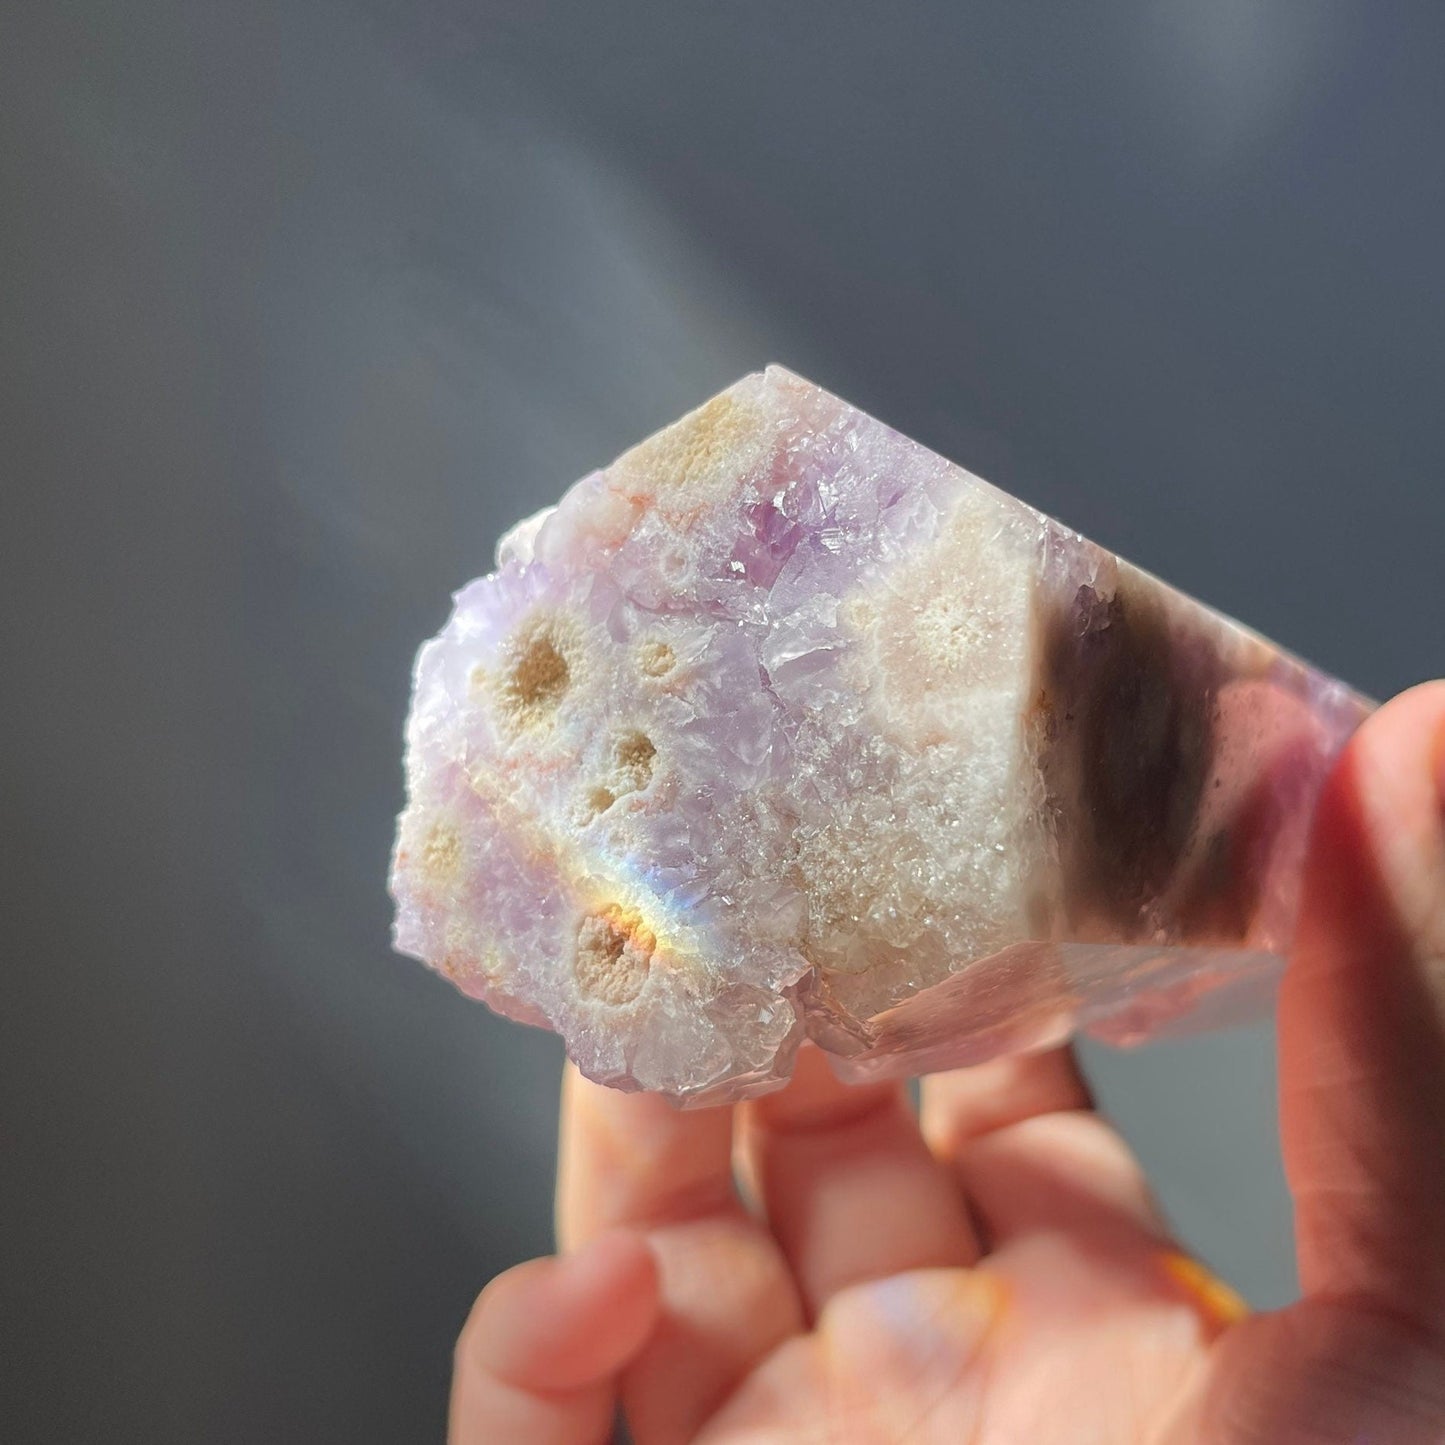 Amethyst & Flower Agate Tower – Crystal Love Collective